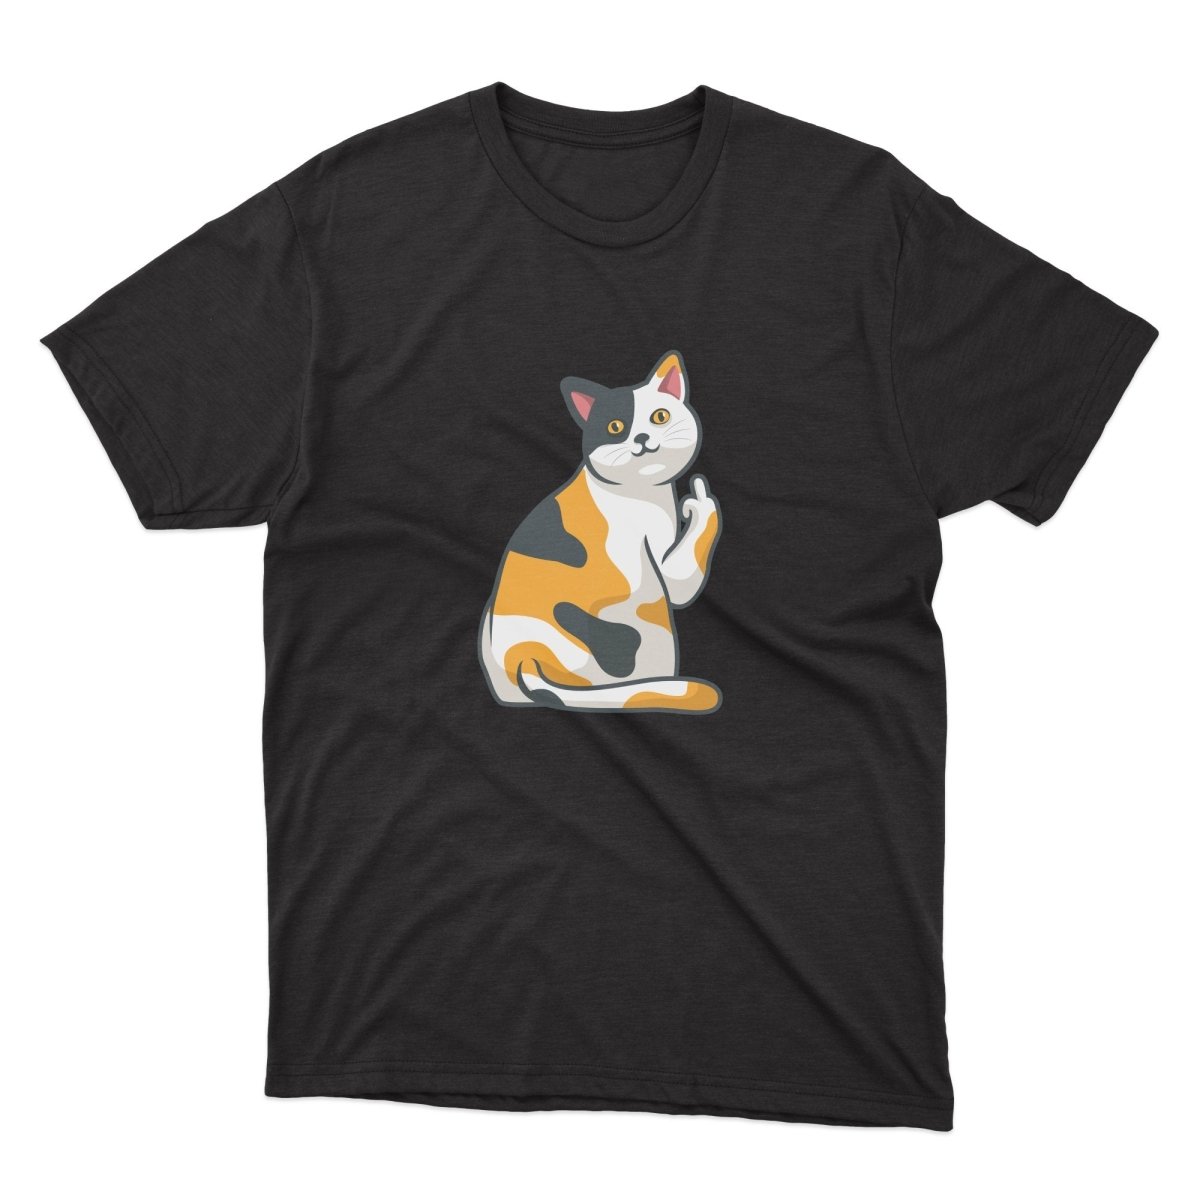 Tabby Cat Flipping Off Shirt - stickerbullTabby Cat Flipping Off ShirtShirtsPrintifystickerbull19285746687716223943BlackSa black t - shirt with an orange and white cat on it